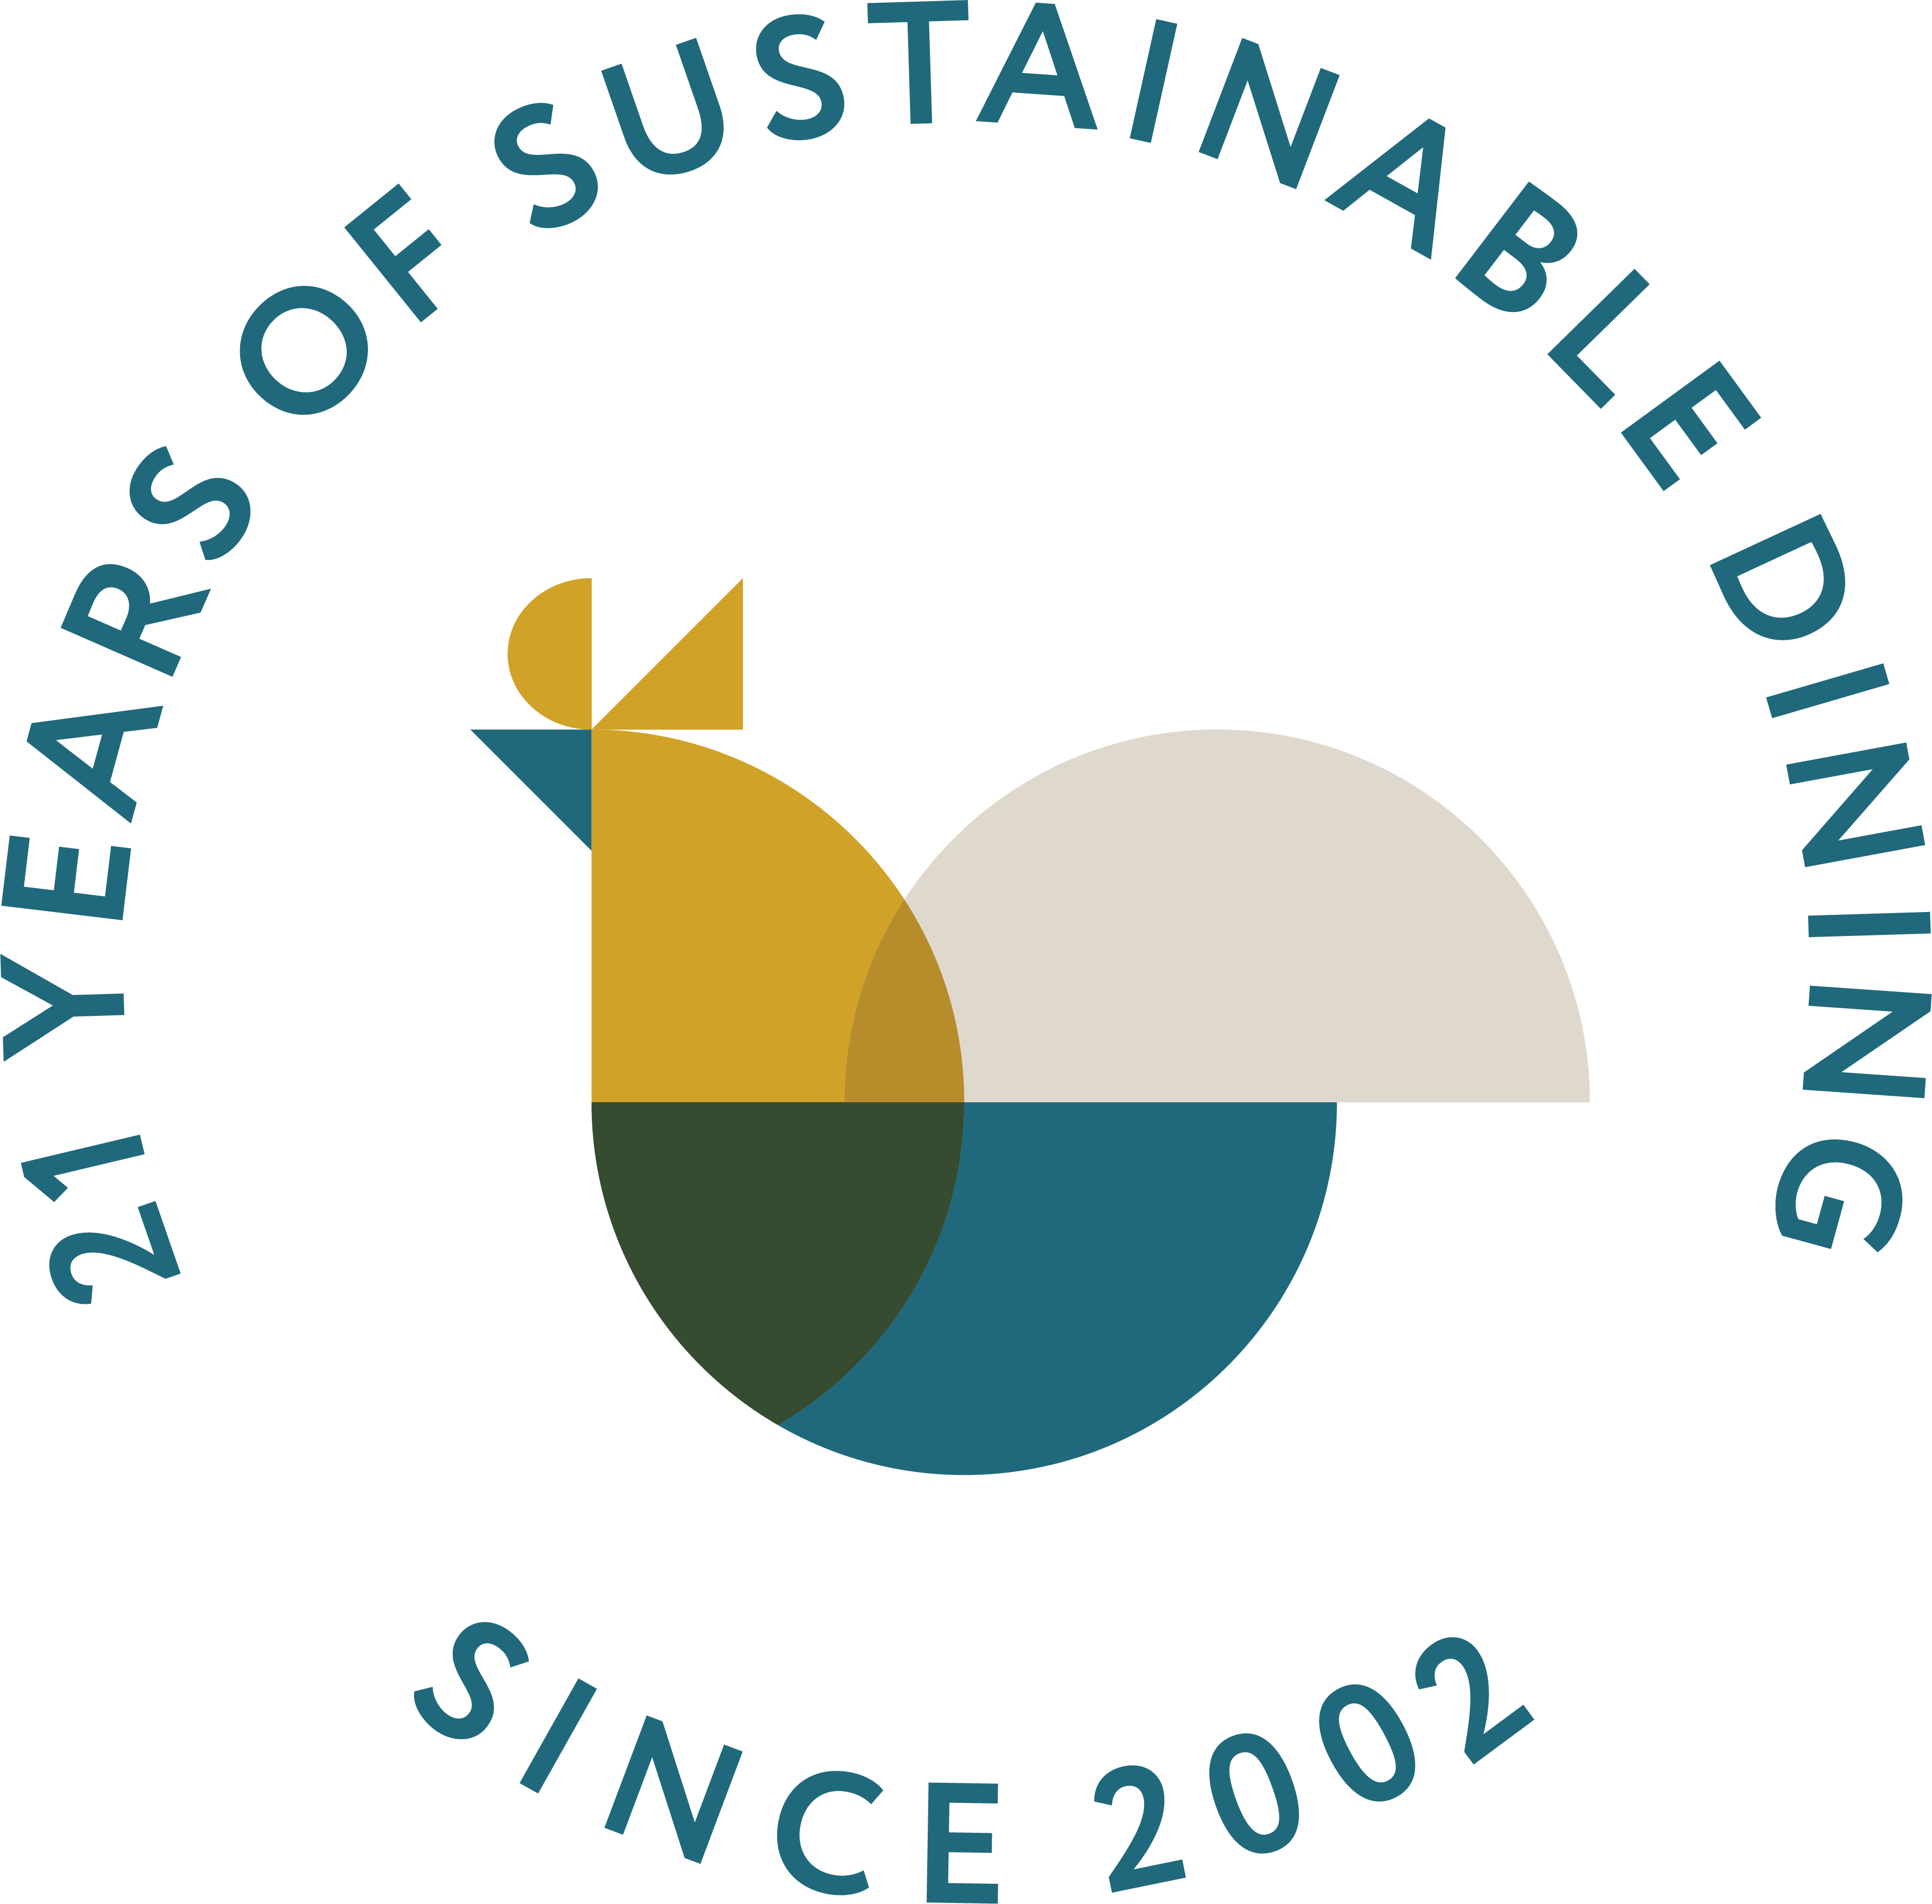 Sustainable Dining since 2002